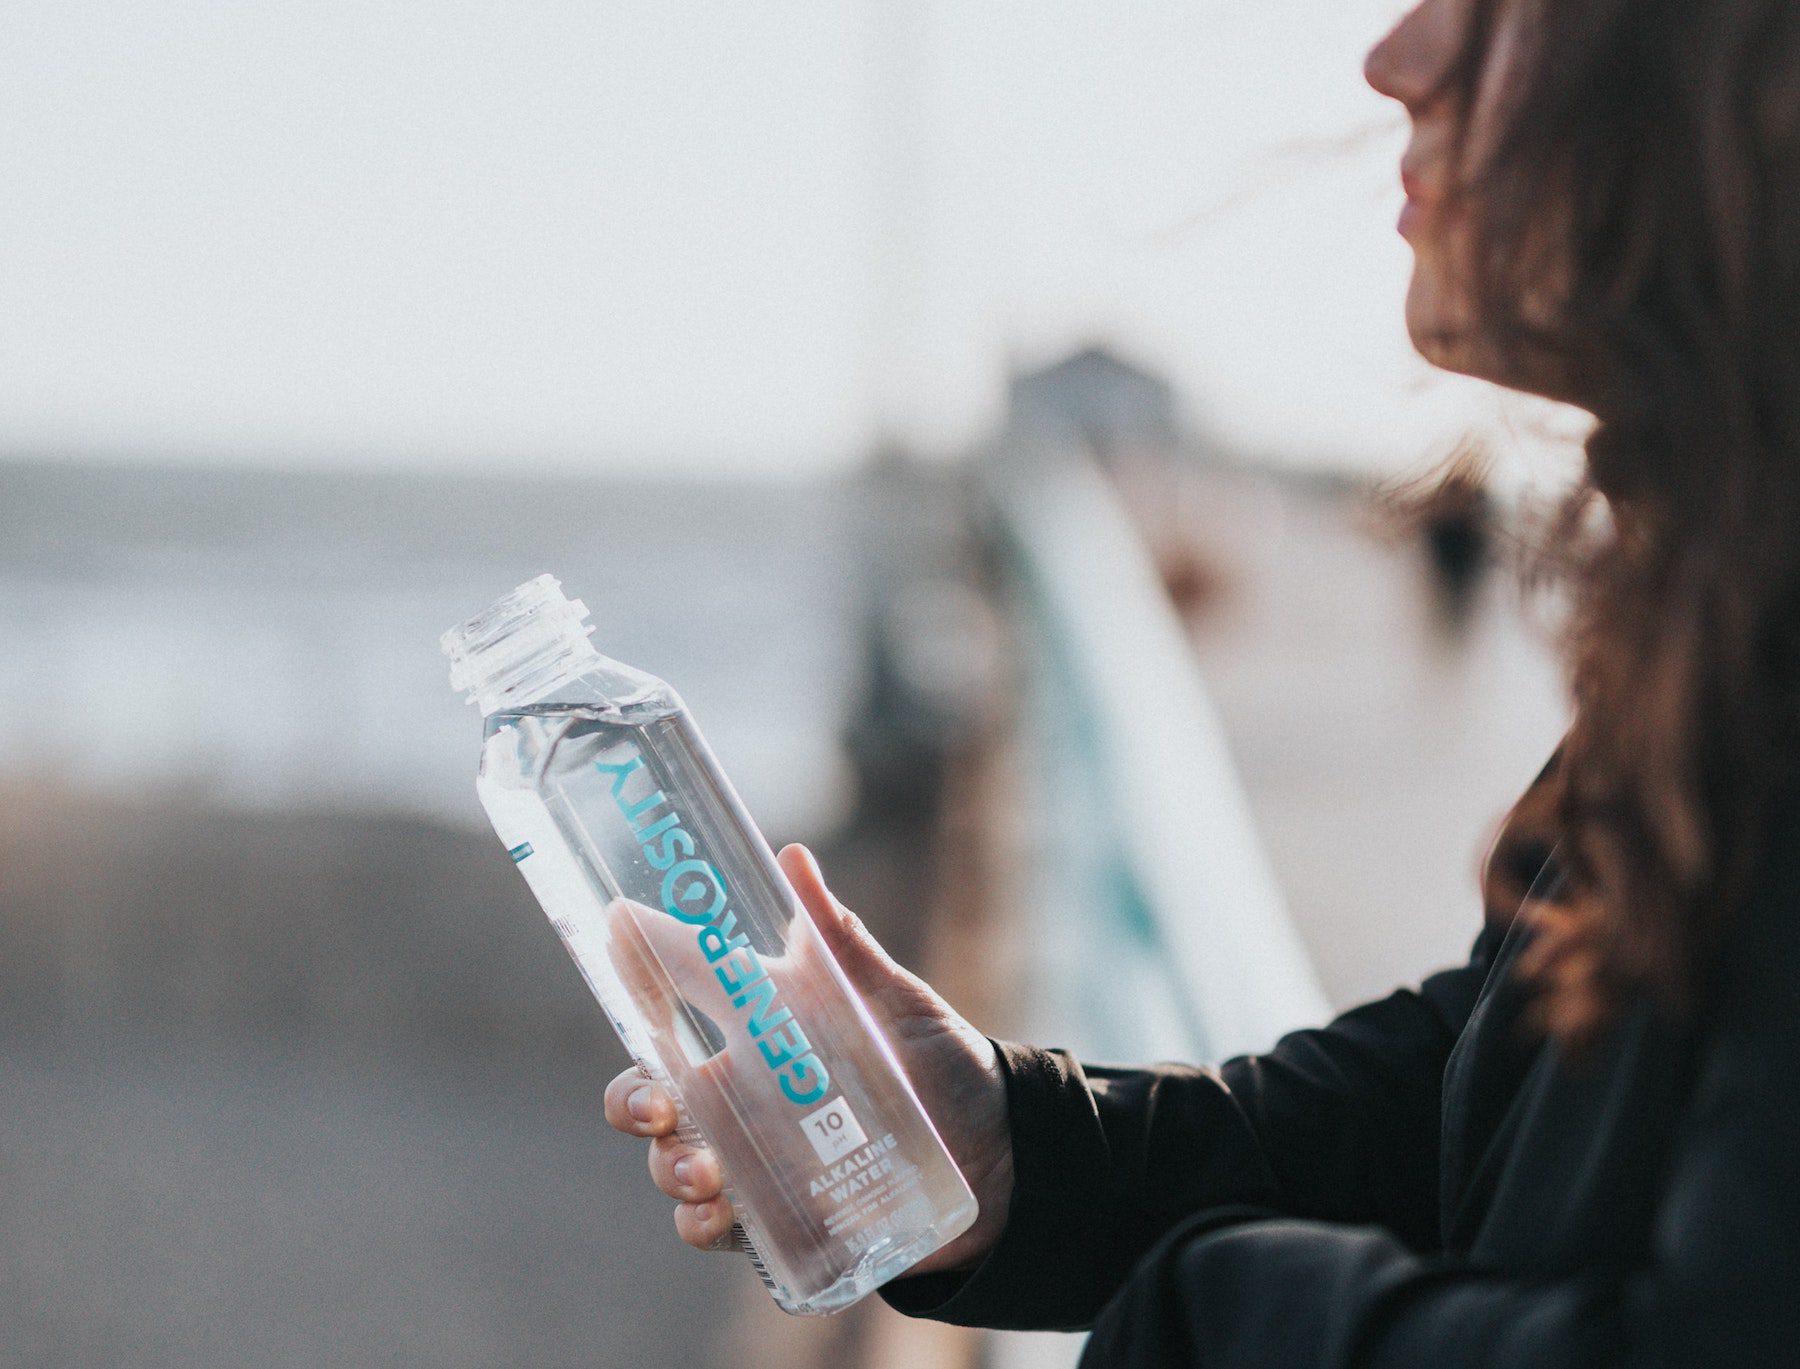 A dark-haired woman in a black sweatshirt holds a plastic water bottle while leaning on a bridge or pier.